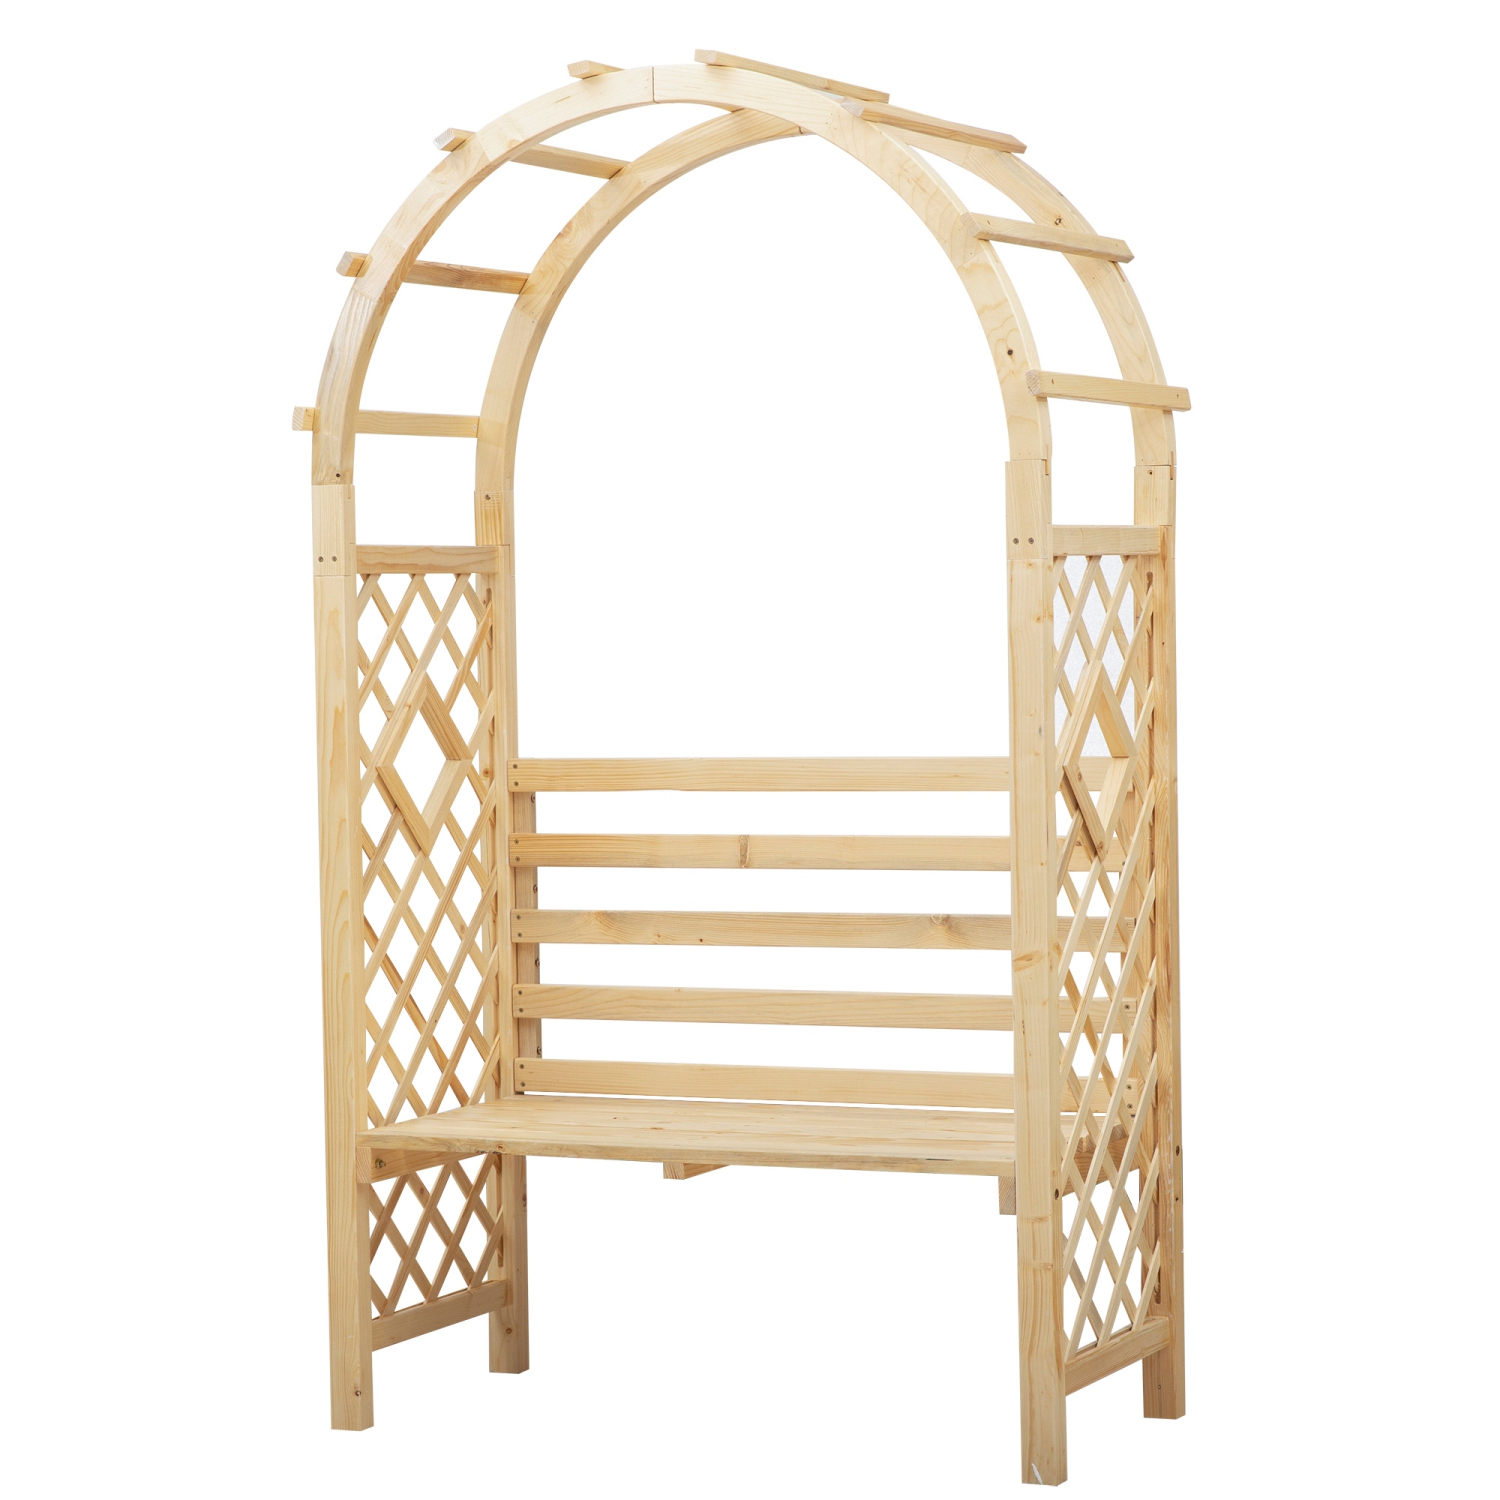 Outsunny Garden Bench with Arch Wooden Bench Trellis for Vines/ Climbing Plants for Patio Furniture, Front Porch Decor, Garden Arbor and Outdoor Garden Seating, Nature